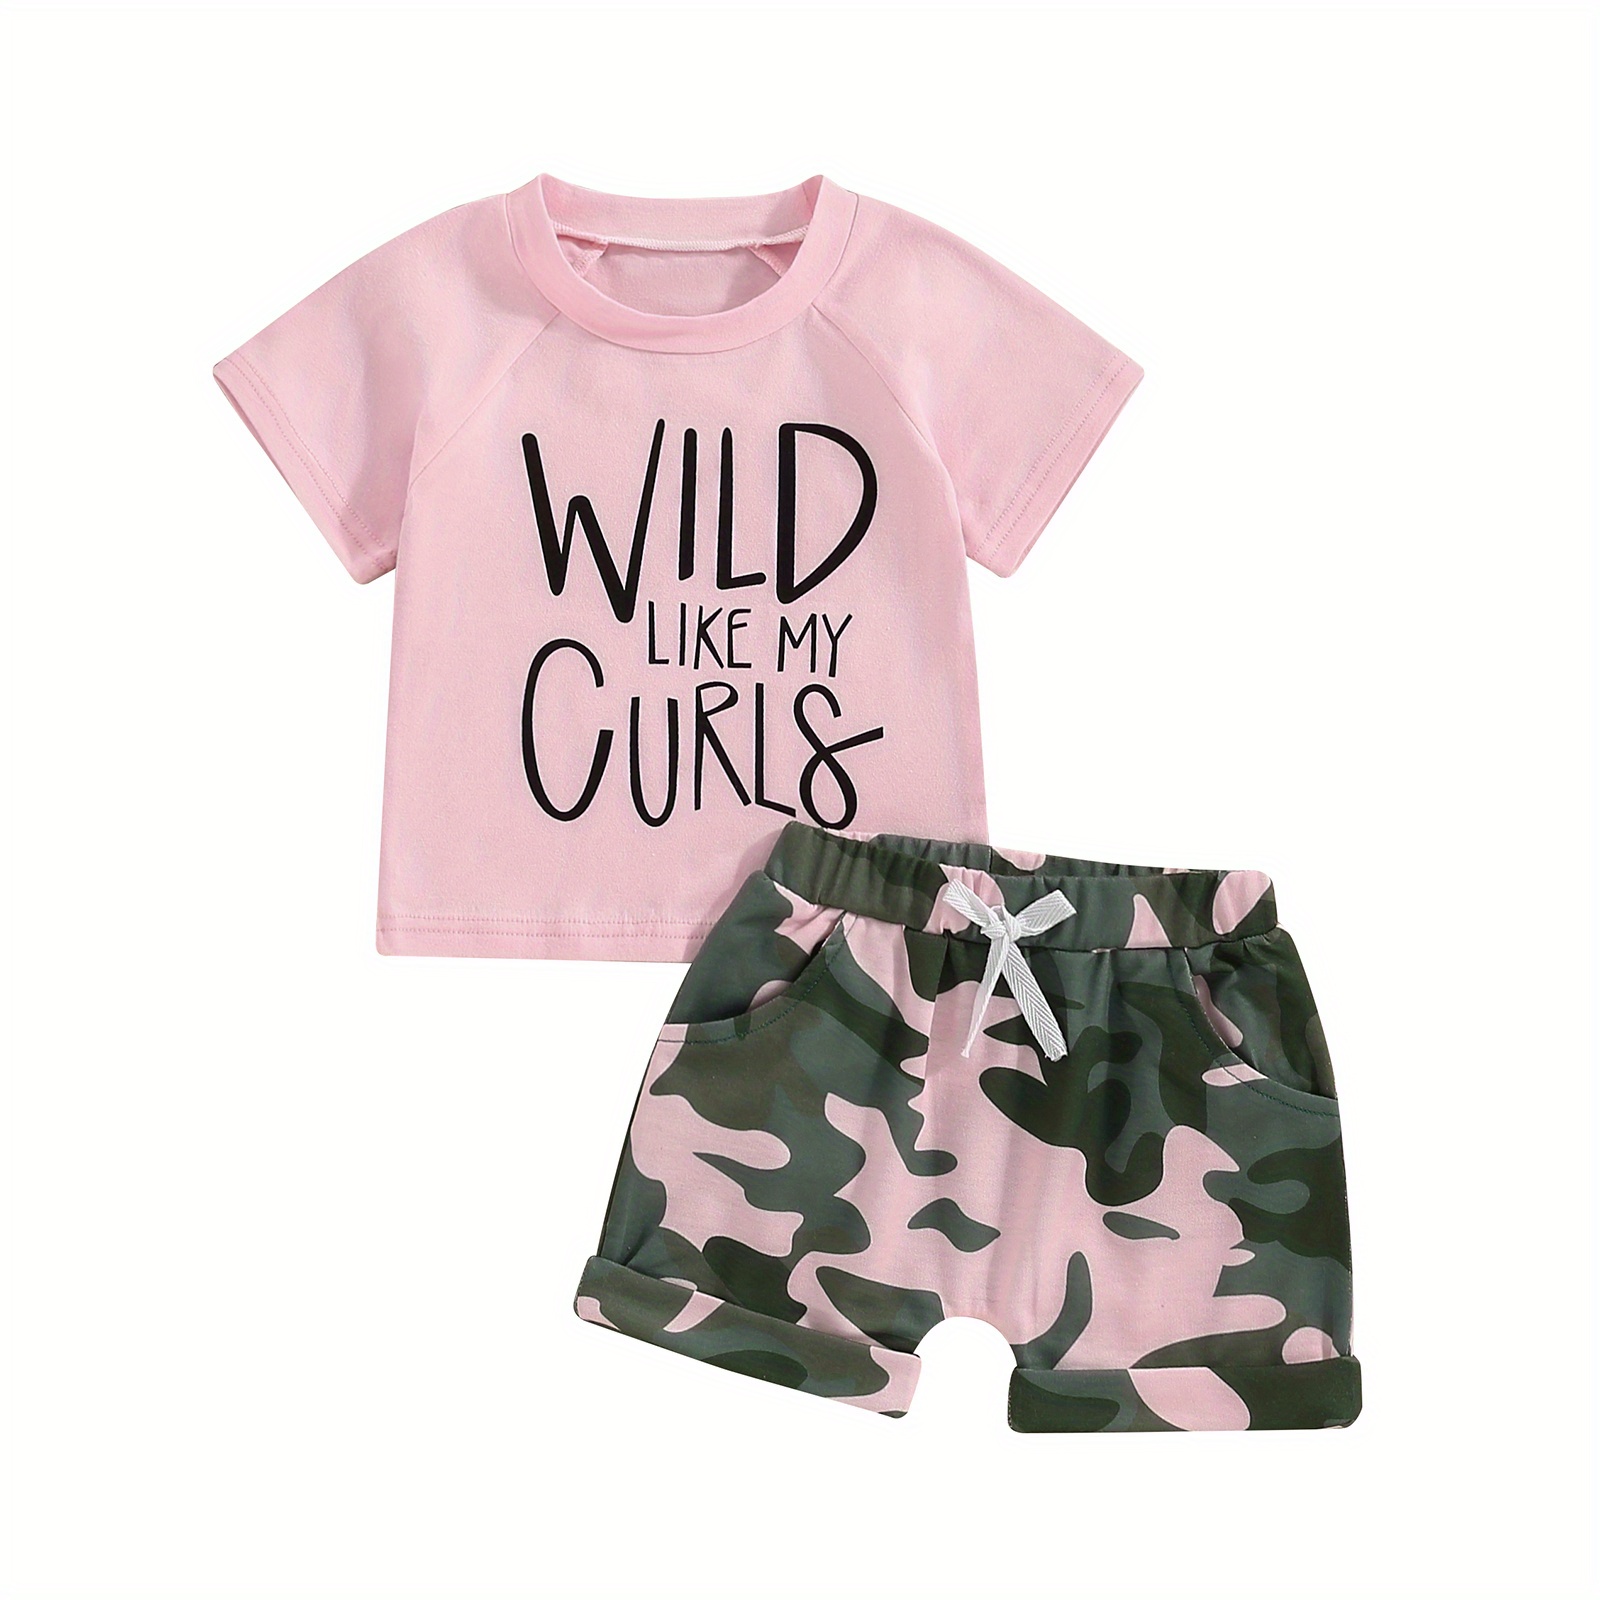 

Kids Little Girls Summer Clothes Set 6m-5t Short Sleeve Round Neck Tops And Elastic Waist Camouflage Print Shorts Toddler 2pcs Outfits